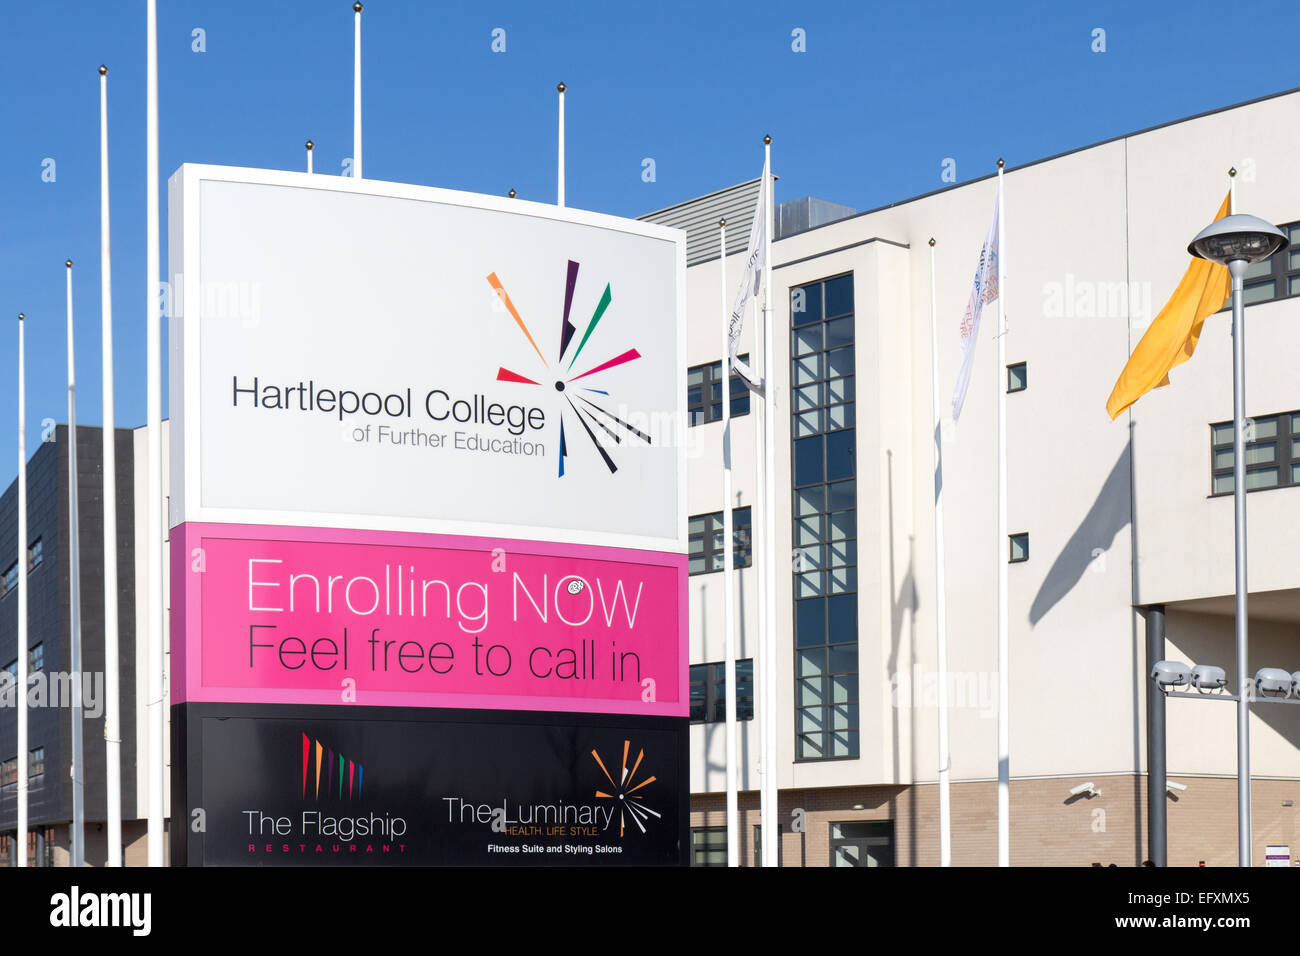 Hartlepool College of Further Education Banque D'Images